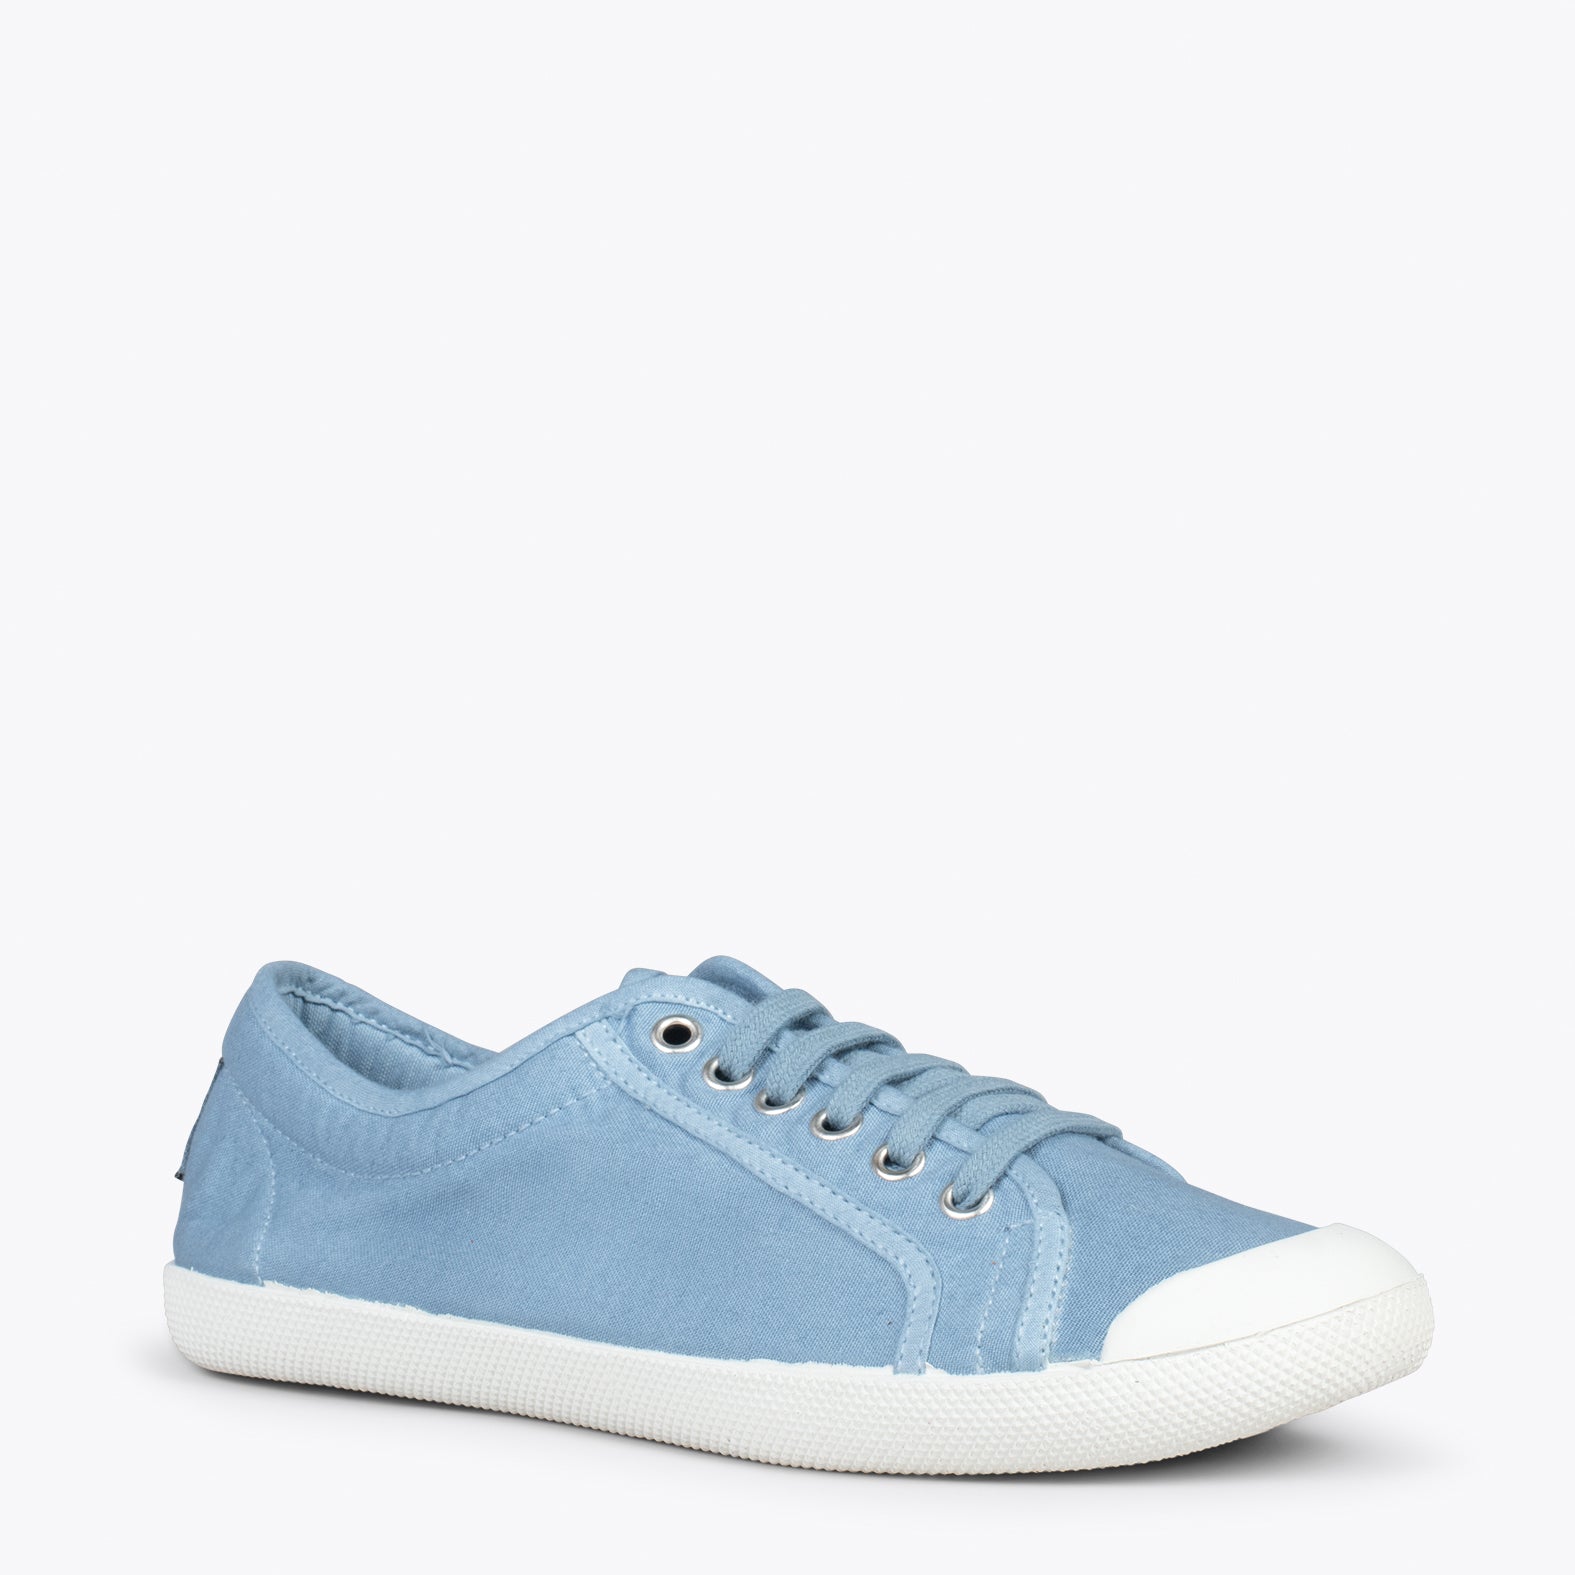 BAOBAB – BLUE BCI cotton sneakers from IO&GO